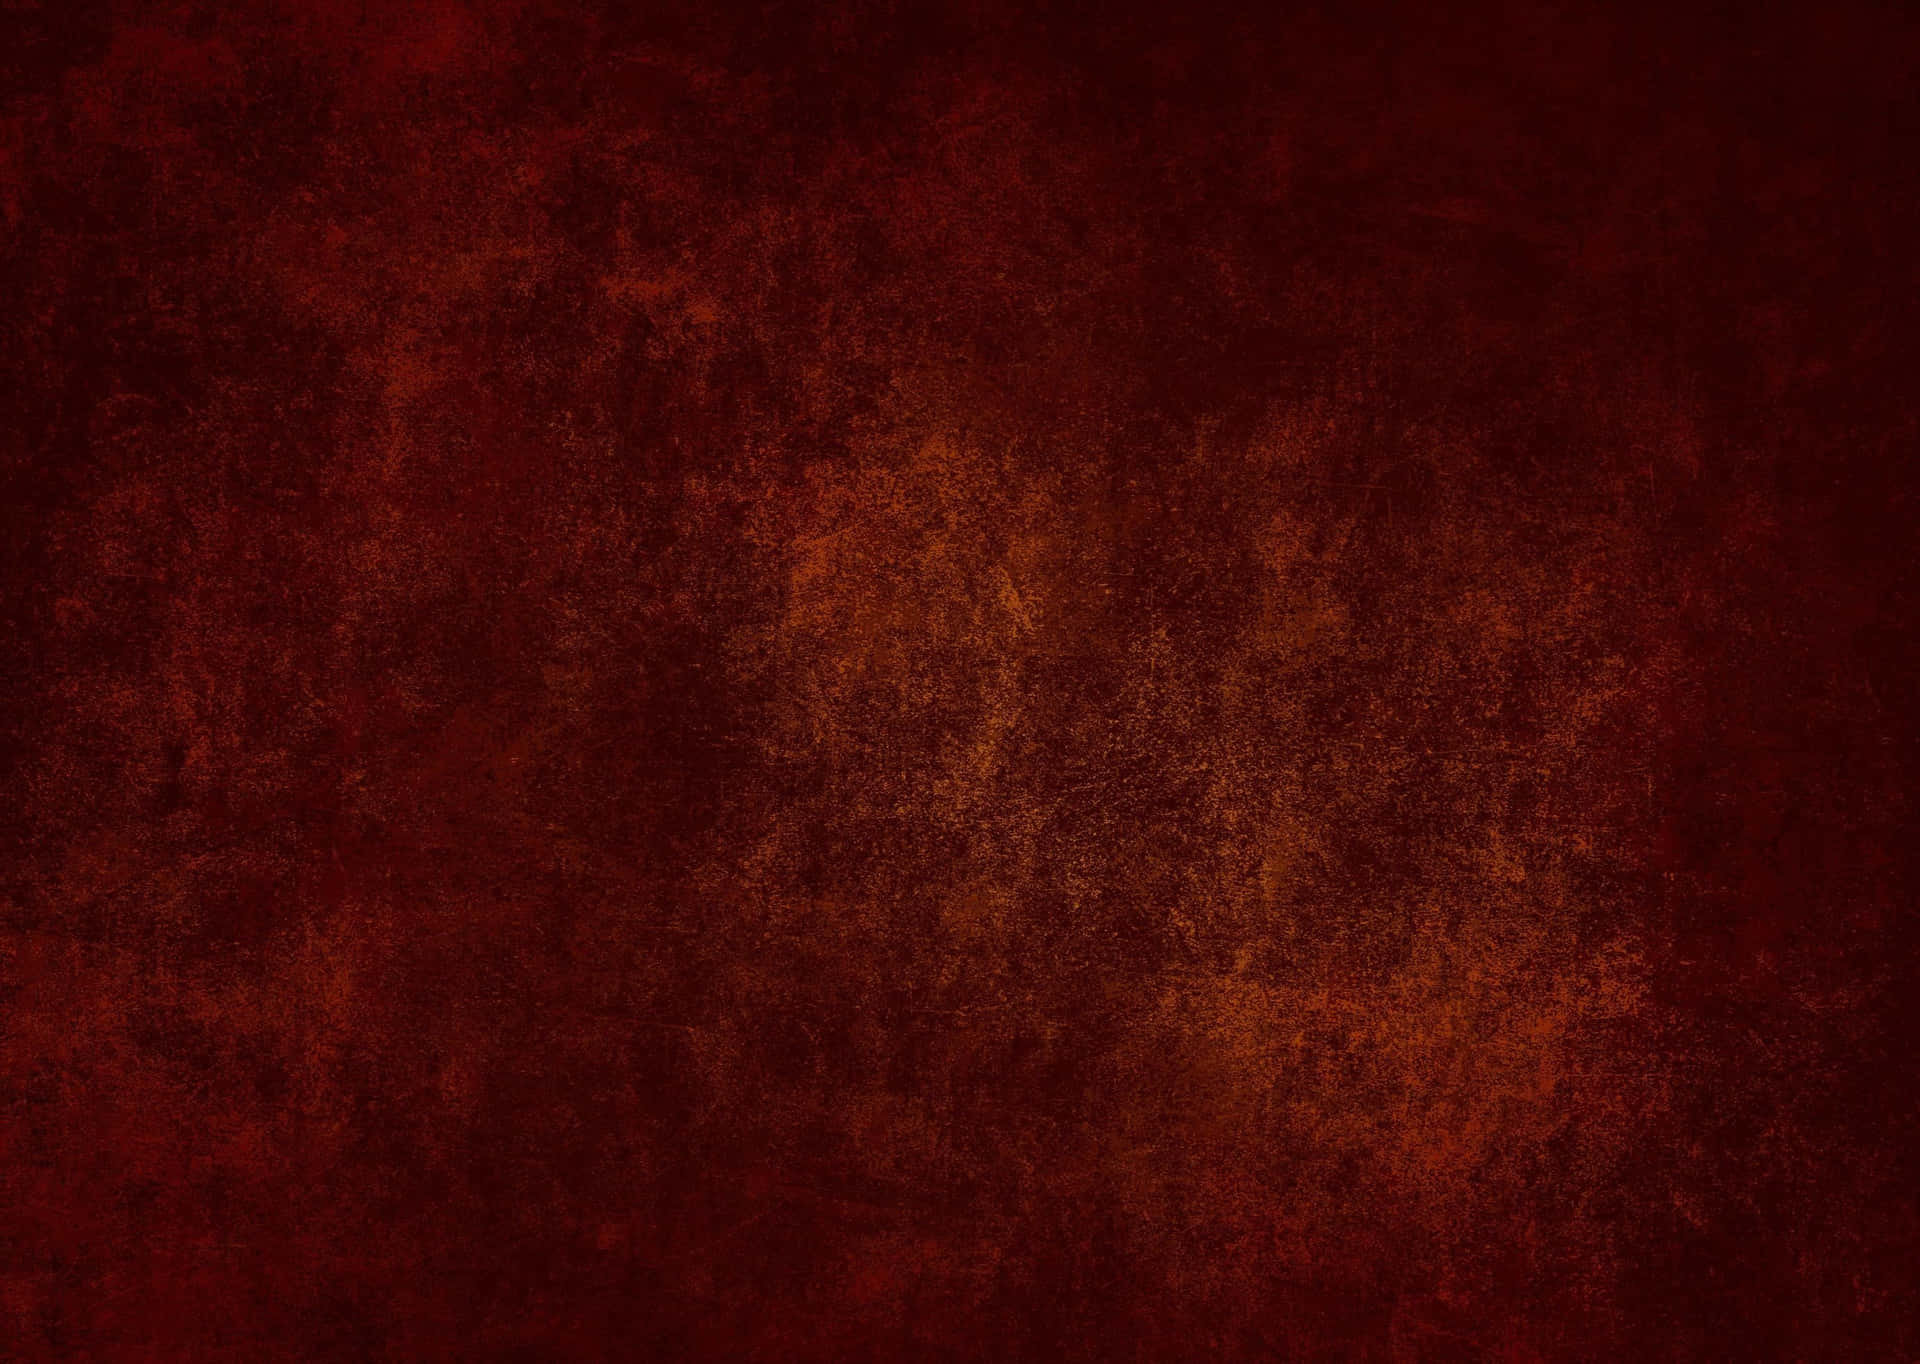 a red and brown grunge background